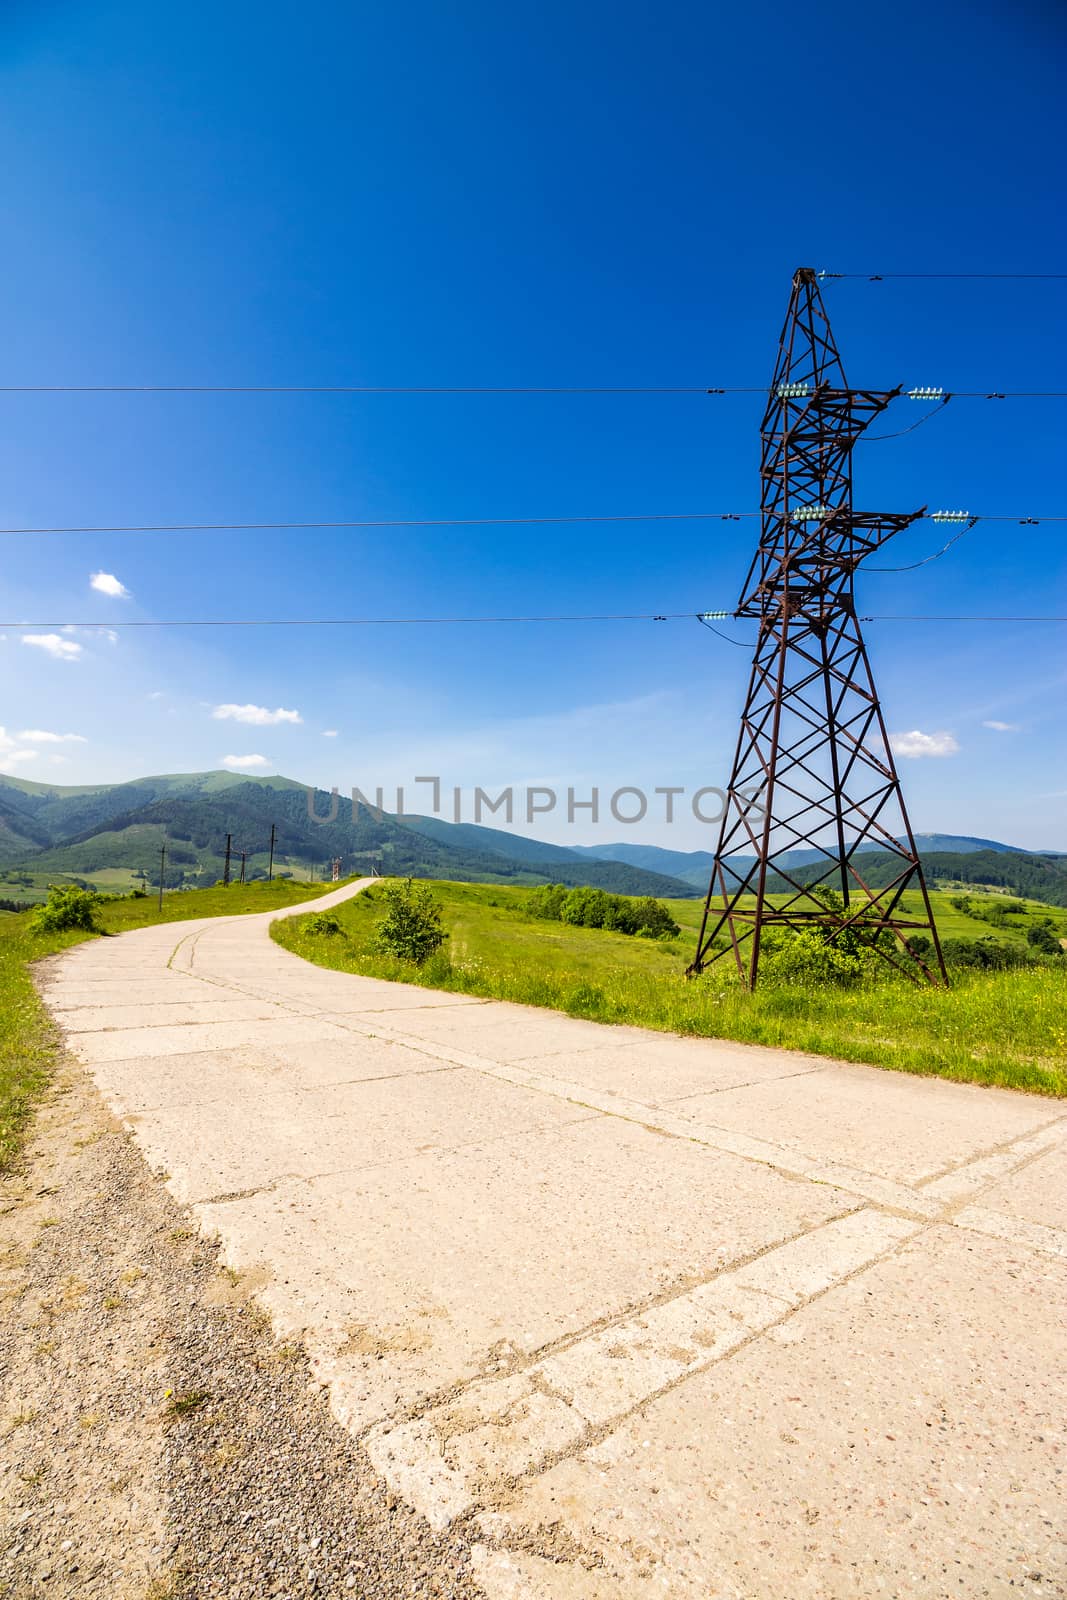 High voltage electric power lines tower near the road in mountains